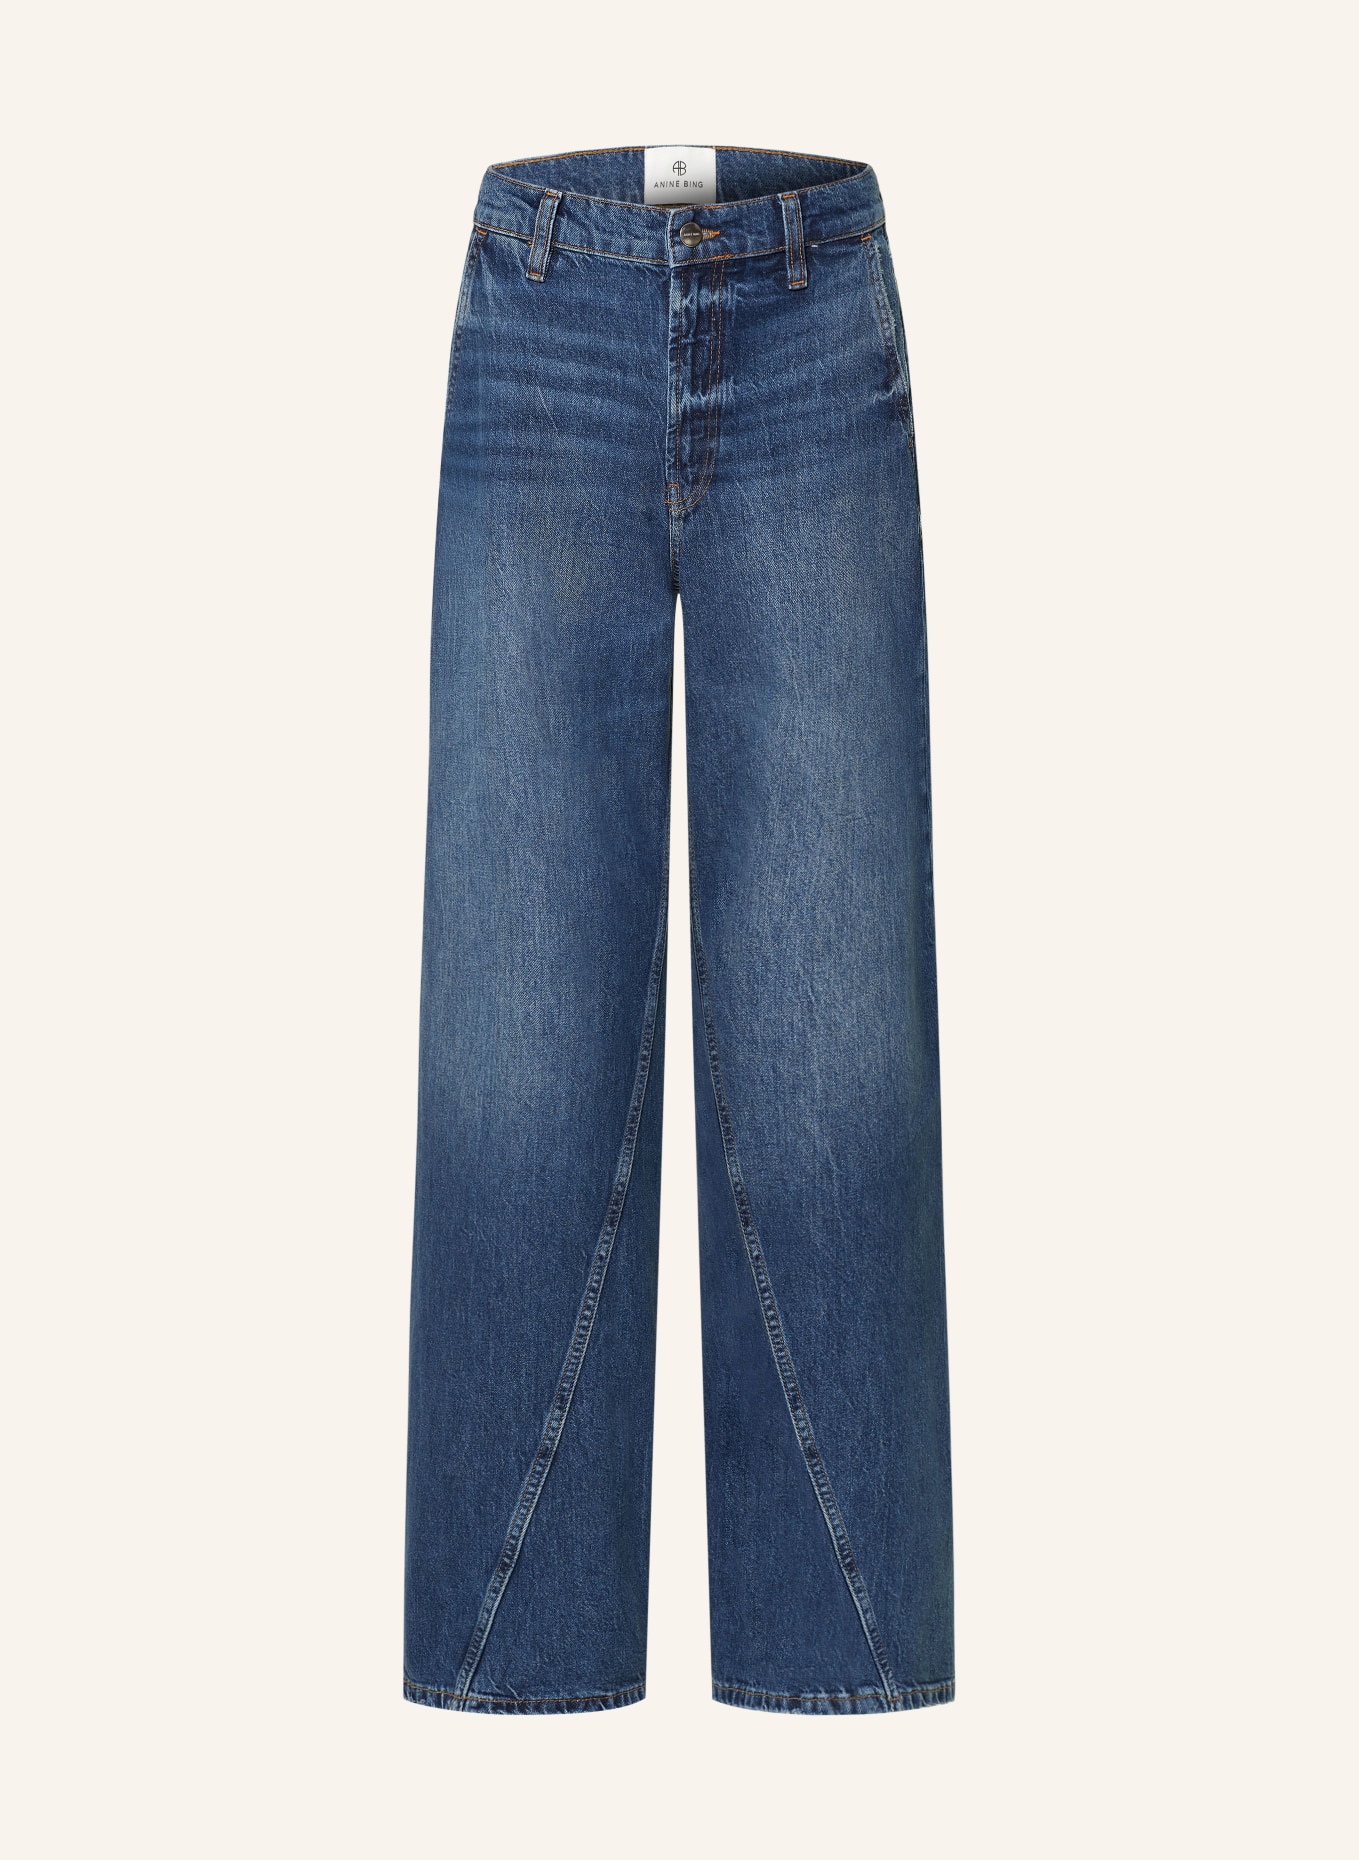 ANINE BING Straight Jeans BRILEY, Farbe: WASHED BLUE WASHED BLUE (Bild 1)